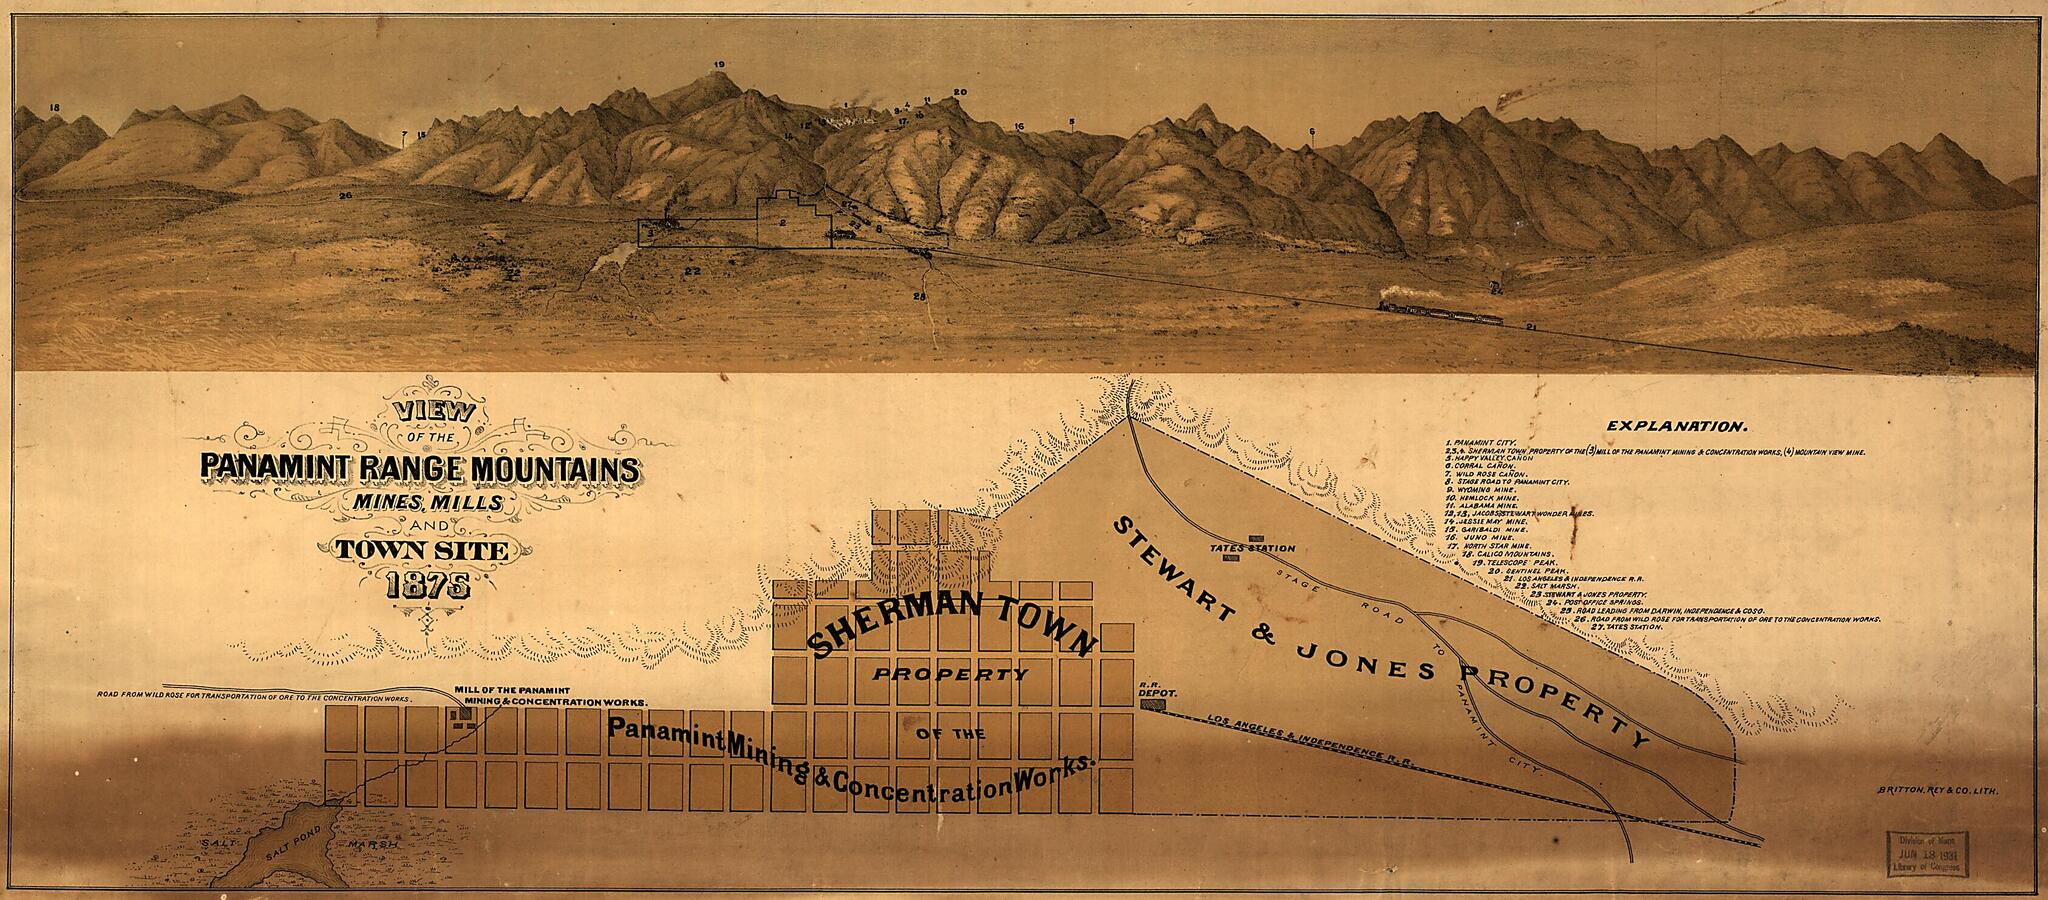 This old map of View of the Panamint Range Mountains, Mines, Mills and Town Site ; Sherman Town, Property of the Panamint Mining &amp; Concentration Works from 1875 was created by Rey &amp; Co Britton,  Panamint Mining and Concentration Works in 1875